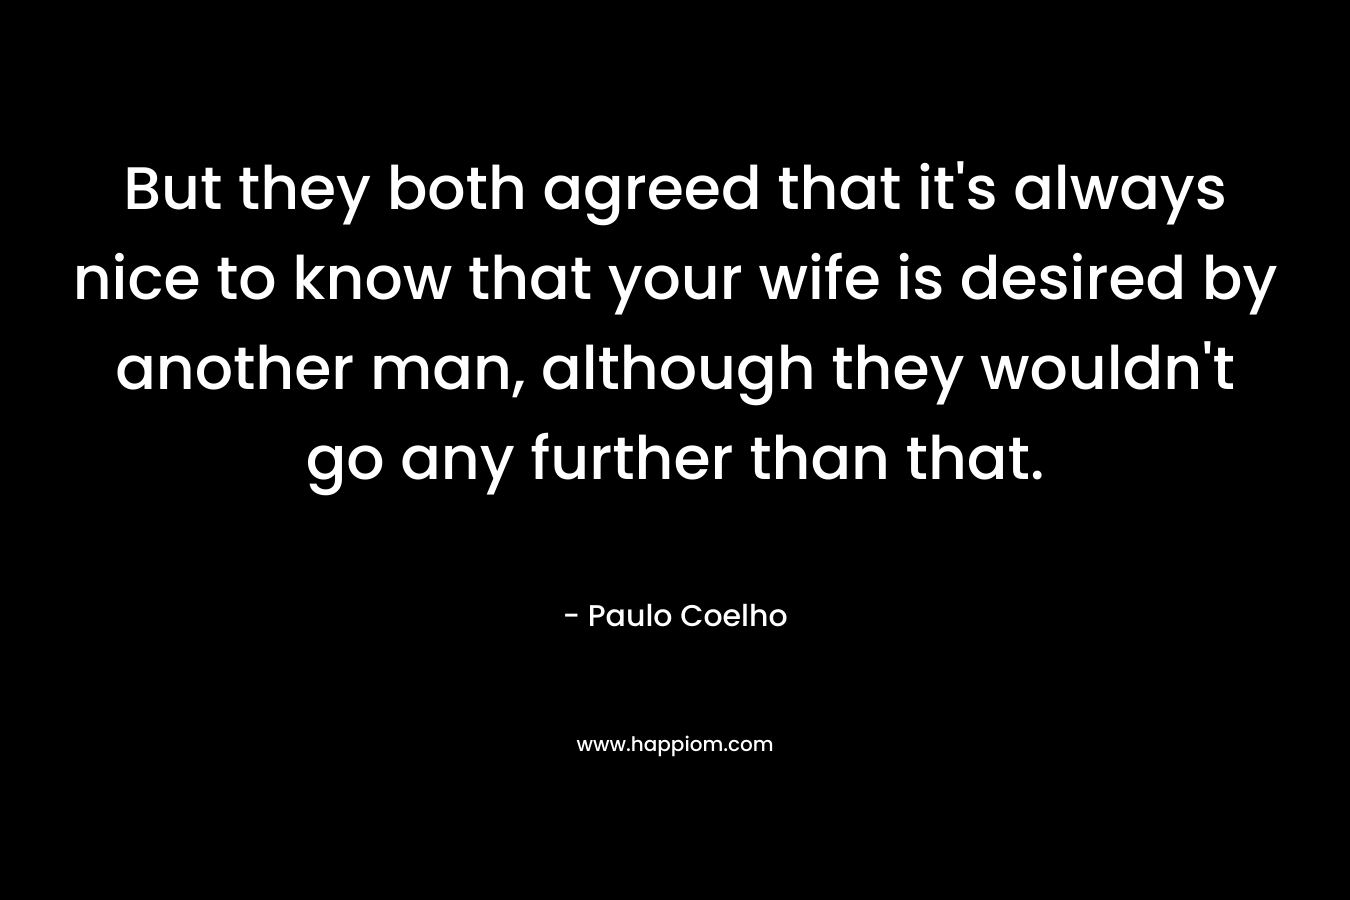 But they both agreed that it’s always nice to know that your wife is desired by another man, although they wouldn’t go any further than that. – Paulo Coelho